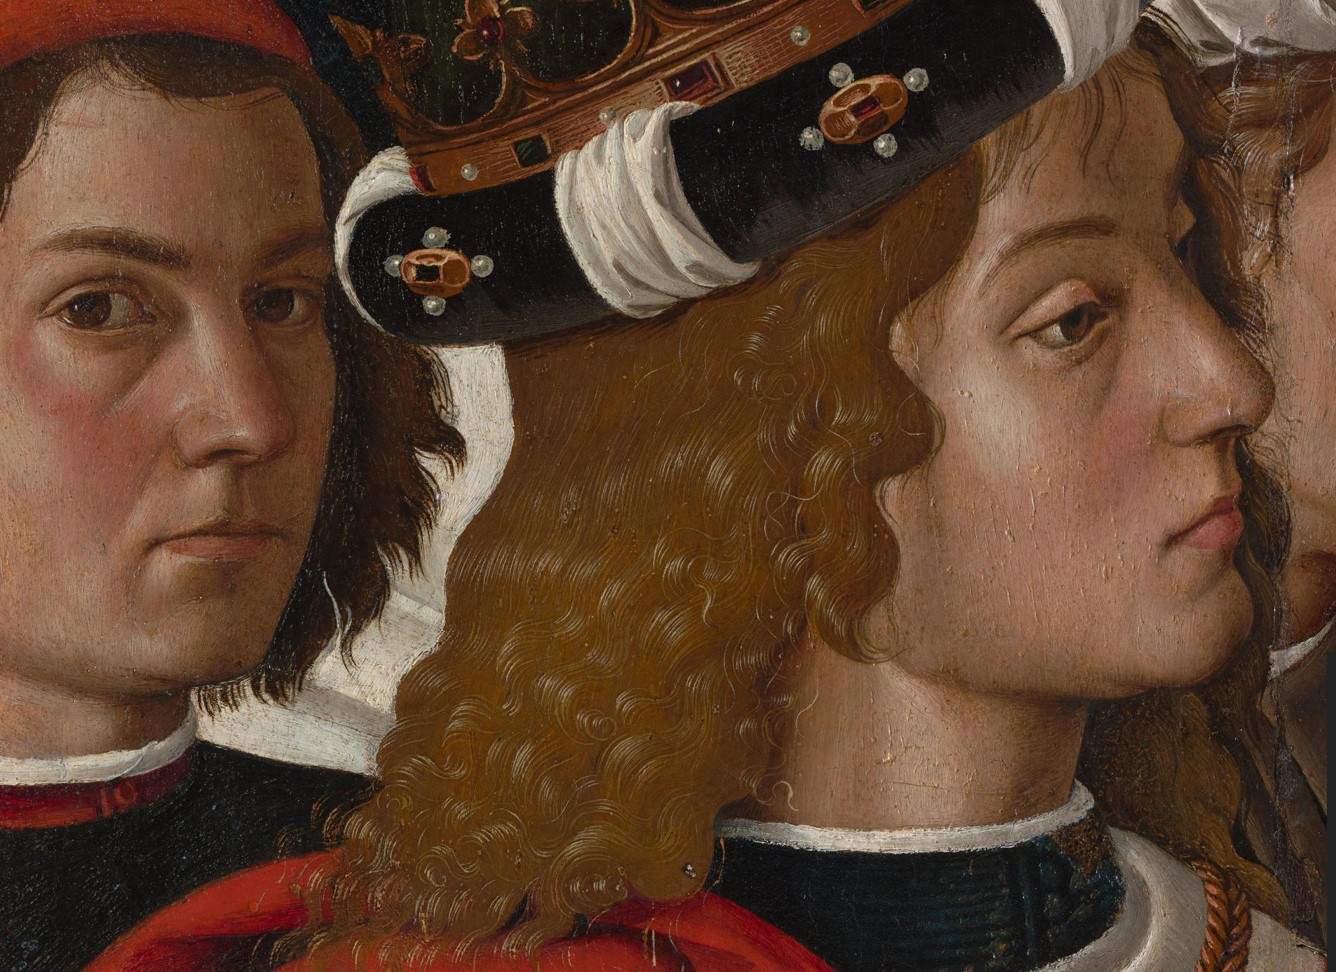 Details of Perugino's masterpieces to explore with a click 